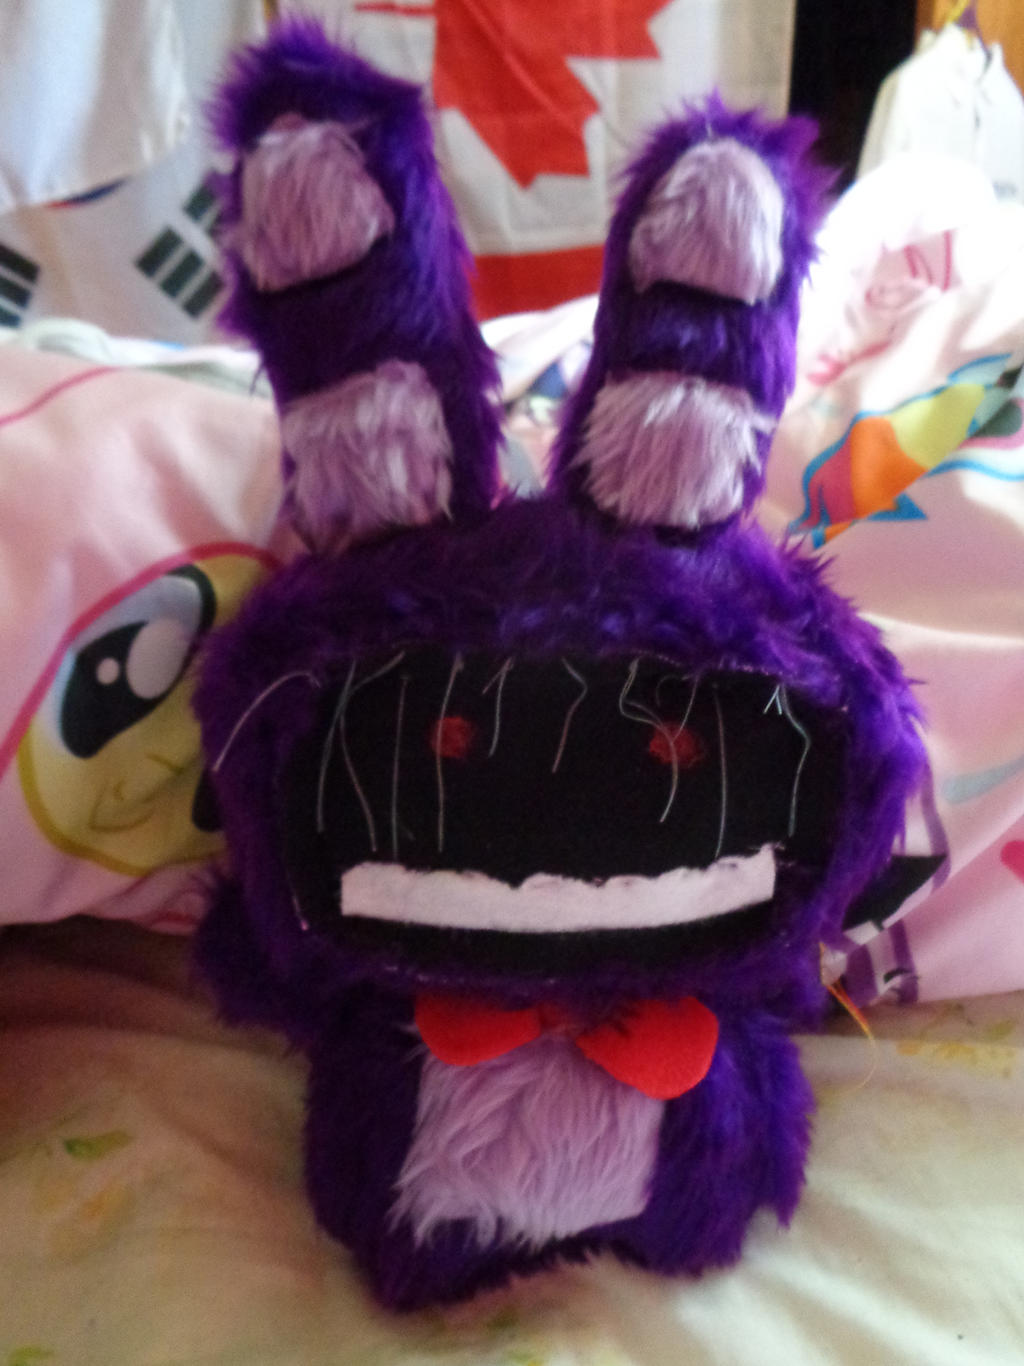 Update 4) My FNAF Plushie Collection by ExplosionMare on DeviantArt